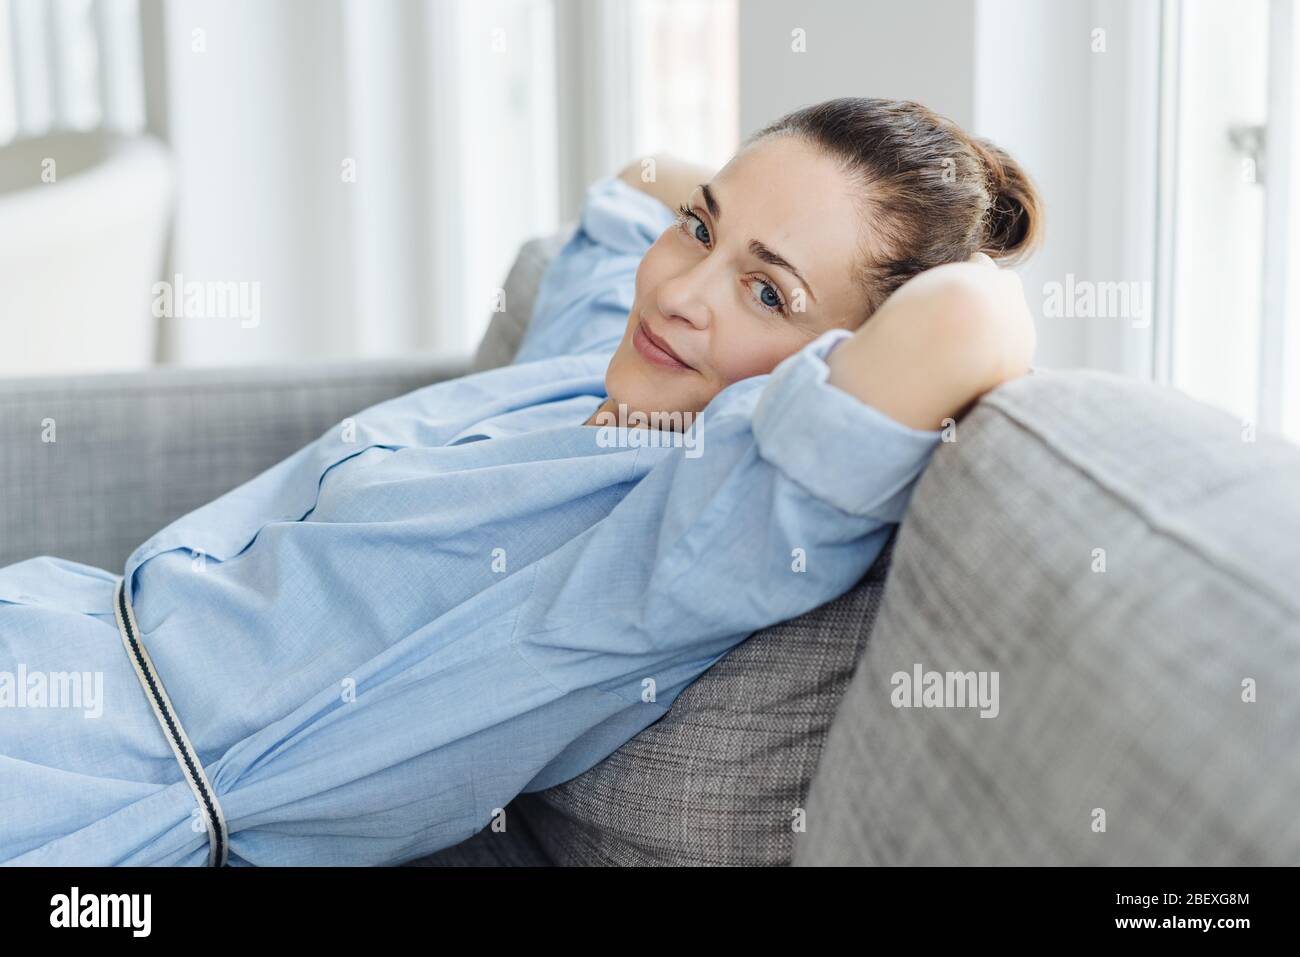 Trendy relaxed young woman unwinding at home on a comfortable sofa turning to smile at camera Stock Photo